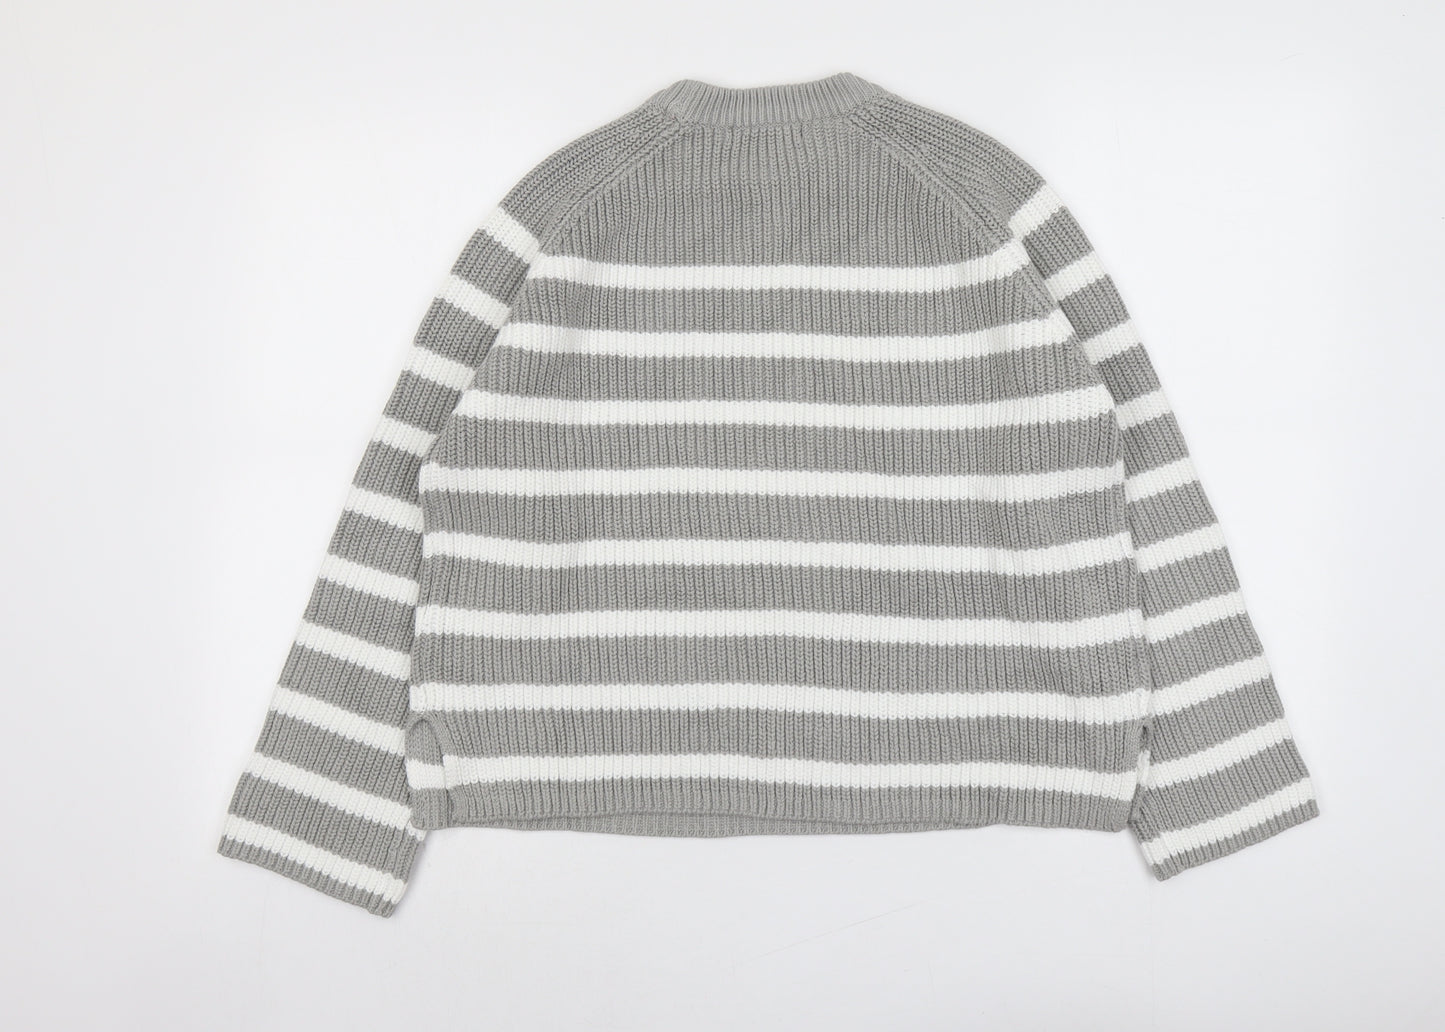 Marks and Spencer Womens Grey Round Neck Striped Cotton Pullover Jumper Size M